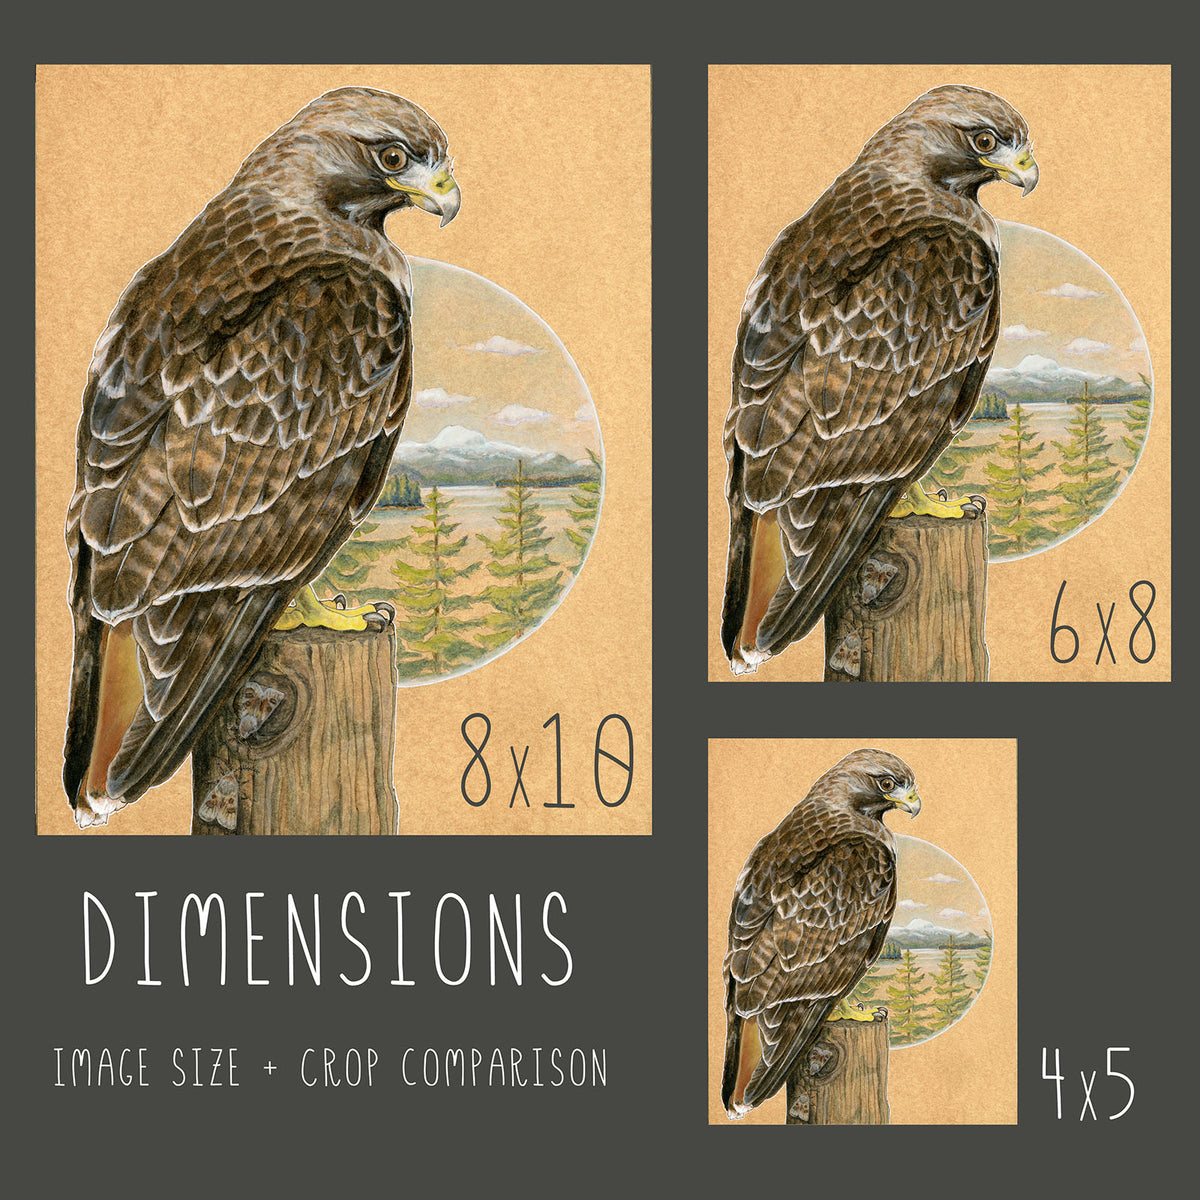 Red-tailed Hawk - Wood Panel Print